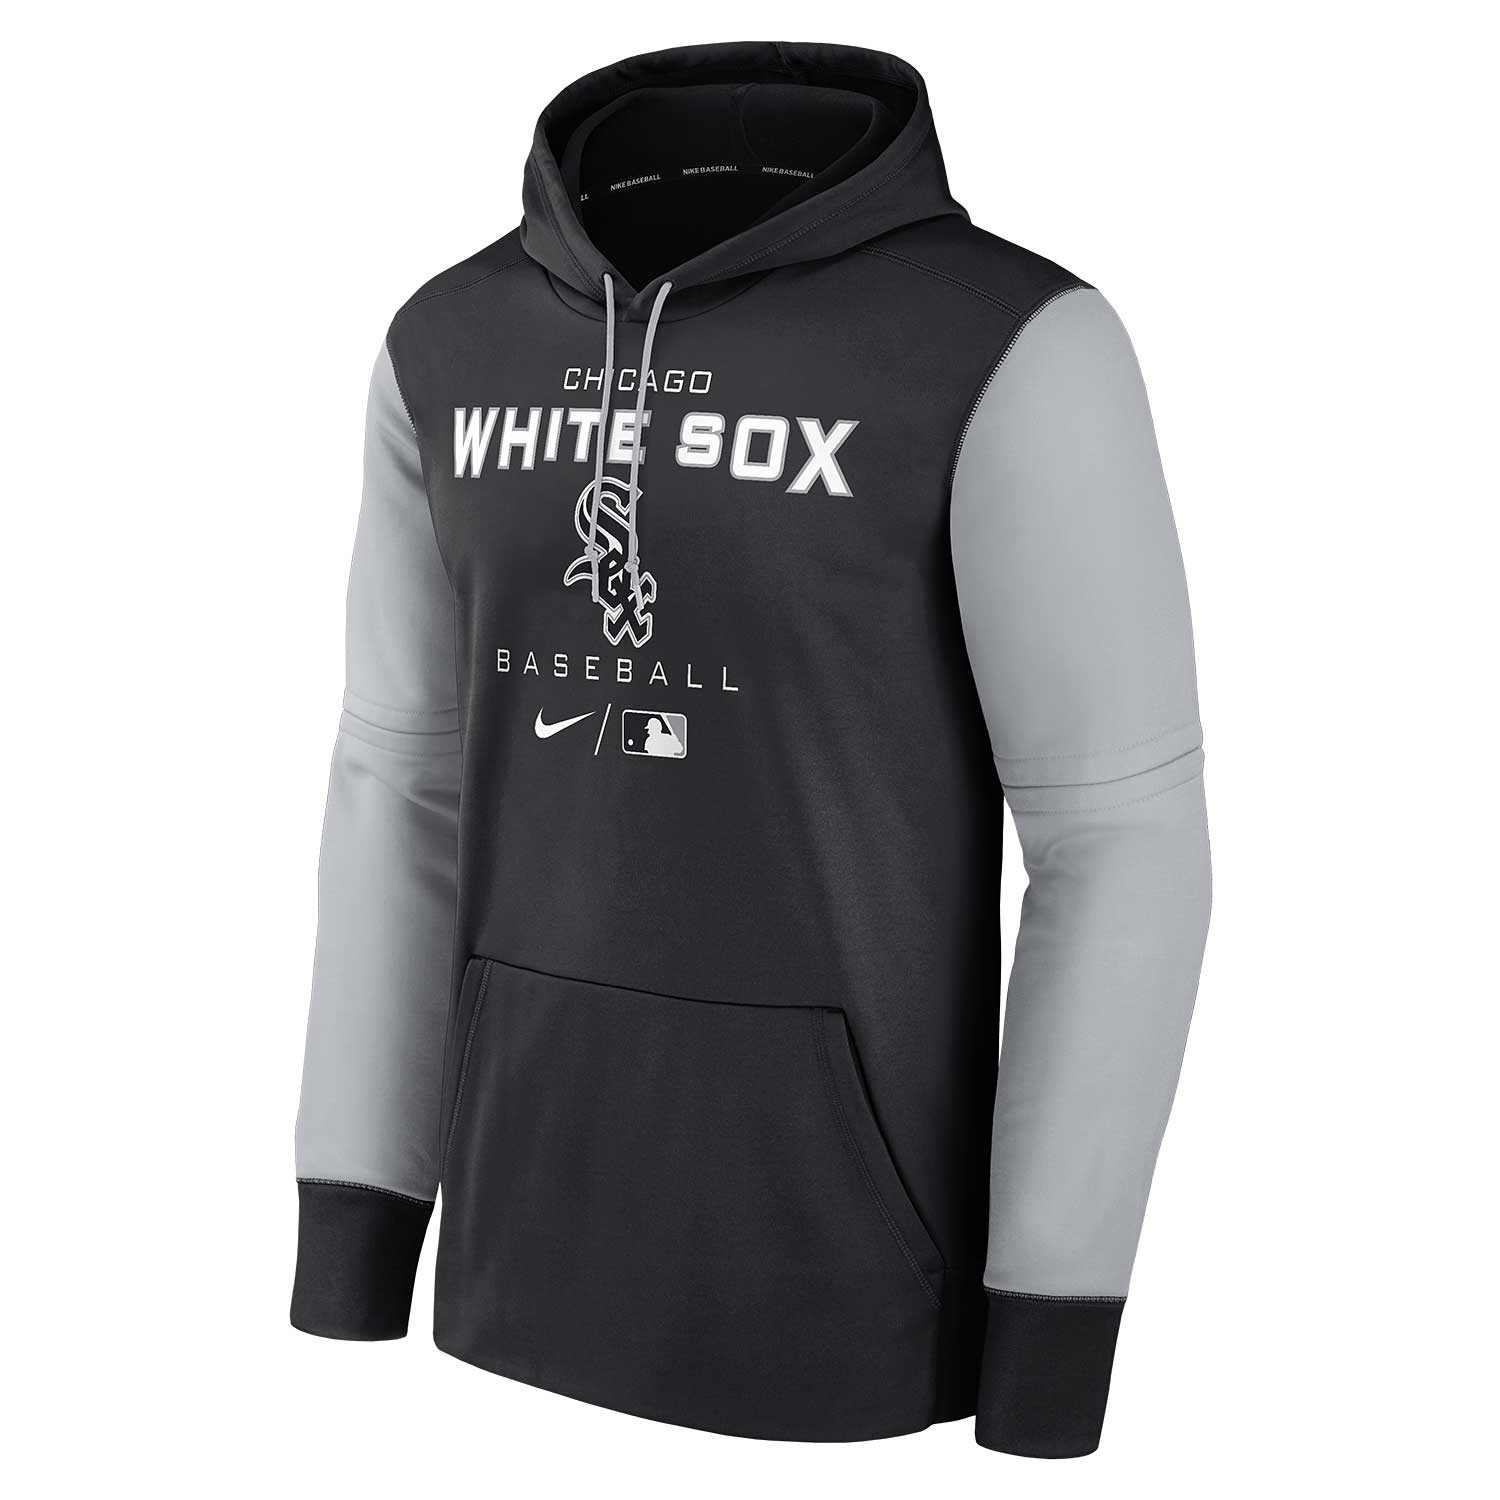 Nike Men's Chicago White Sox Therma-FIT Hoodie - Black - S (Small)